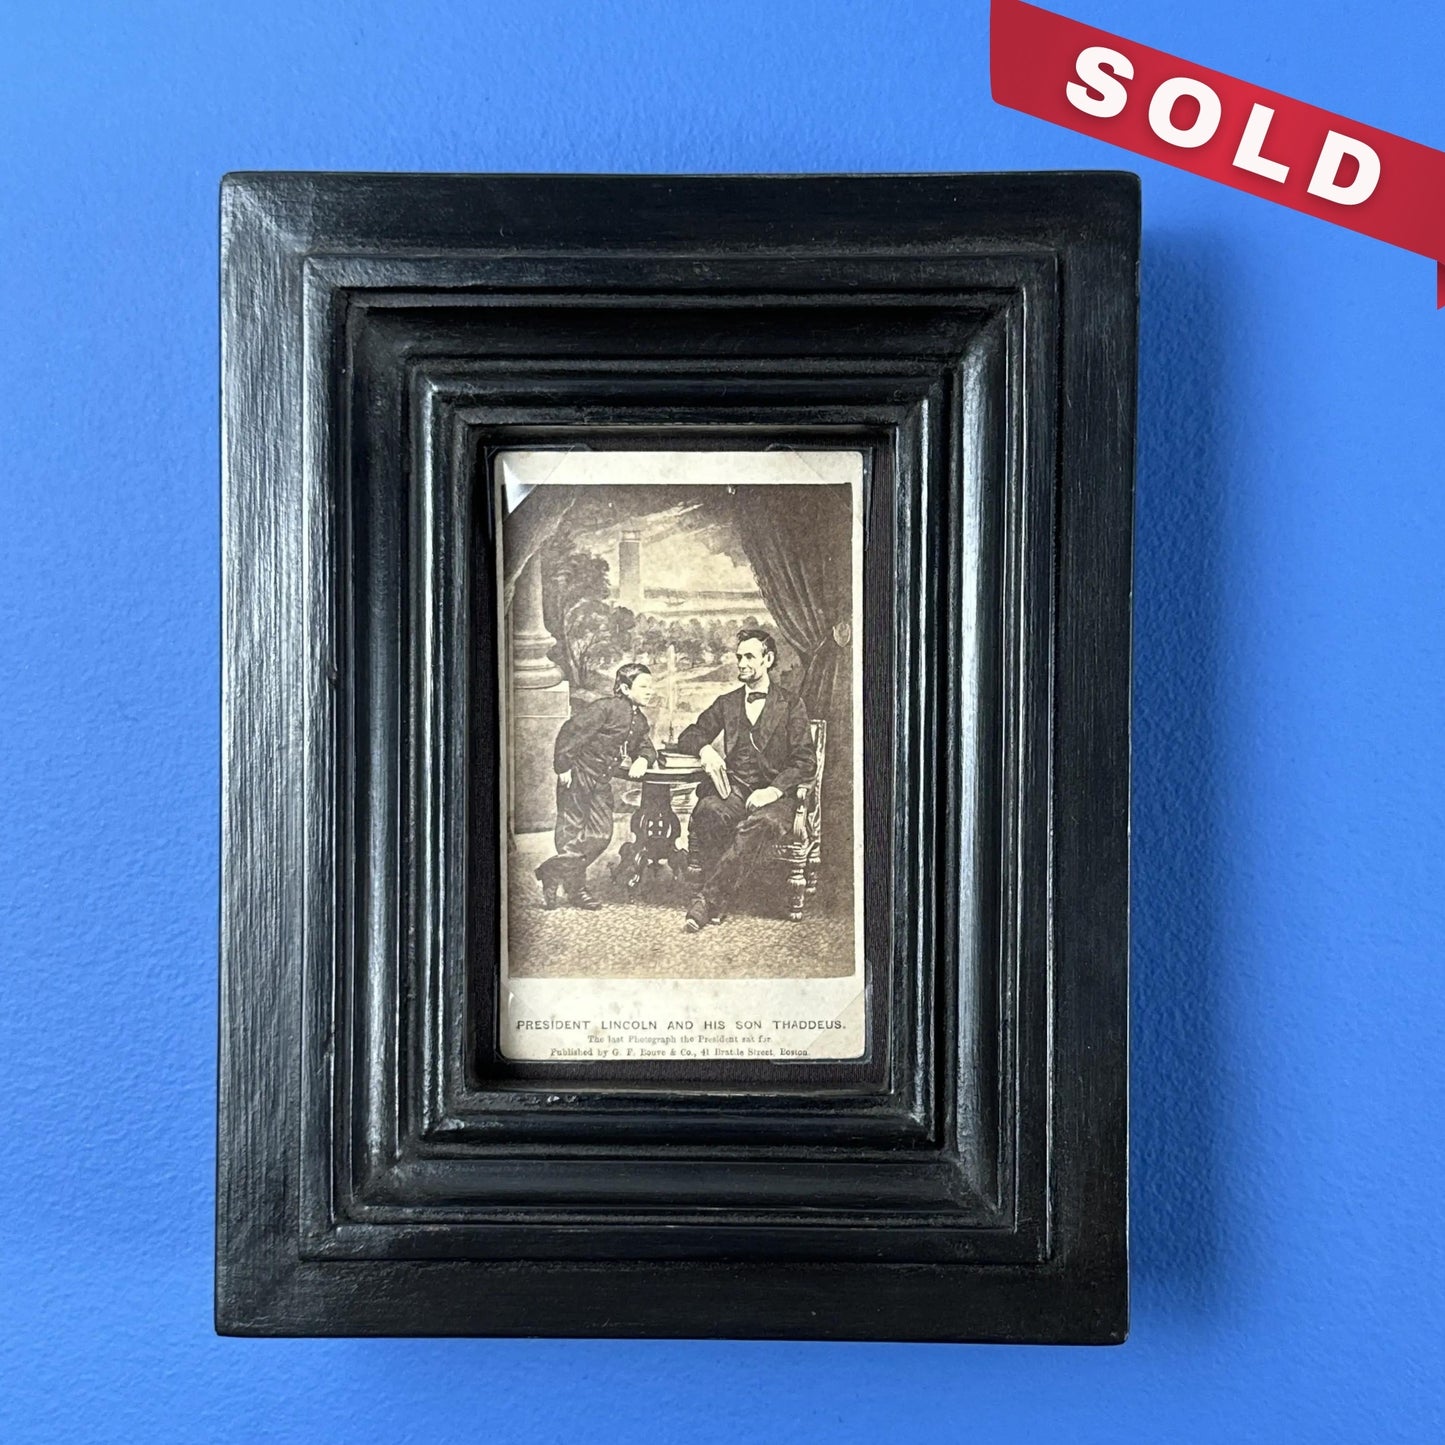 CDV of President Lincoln with Tad —  1865 — In a handmade, solid wood frame